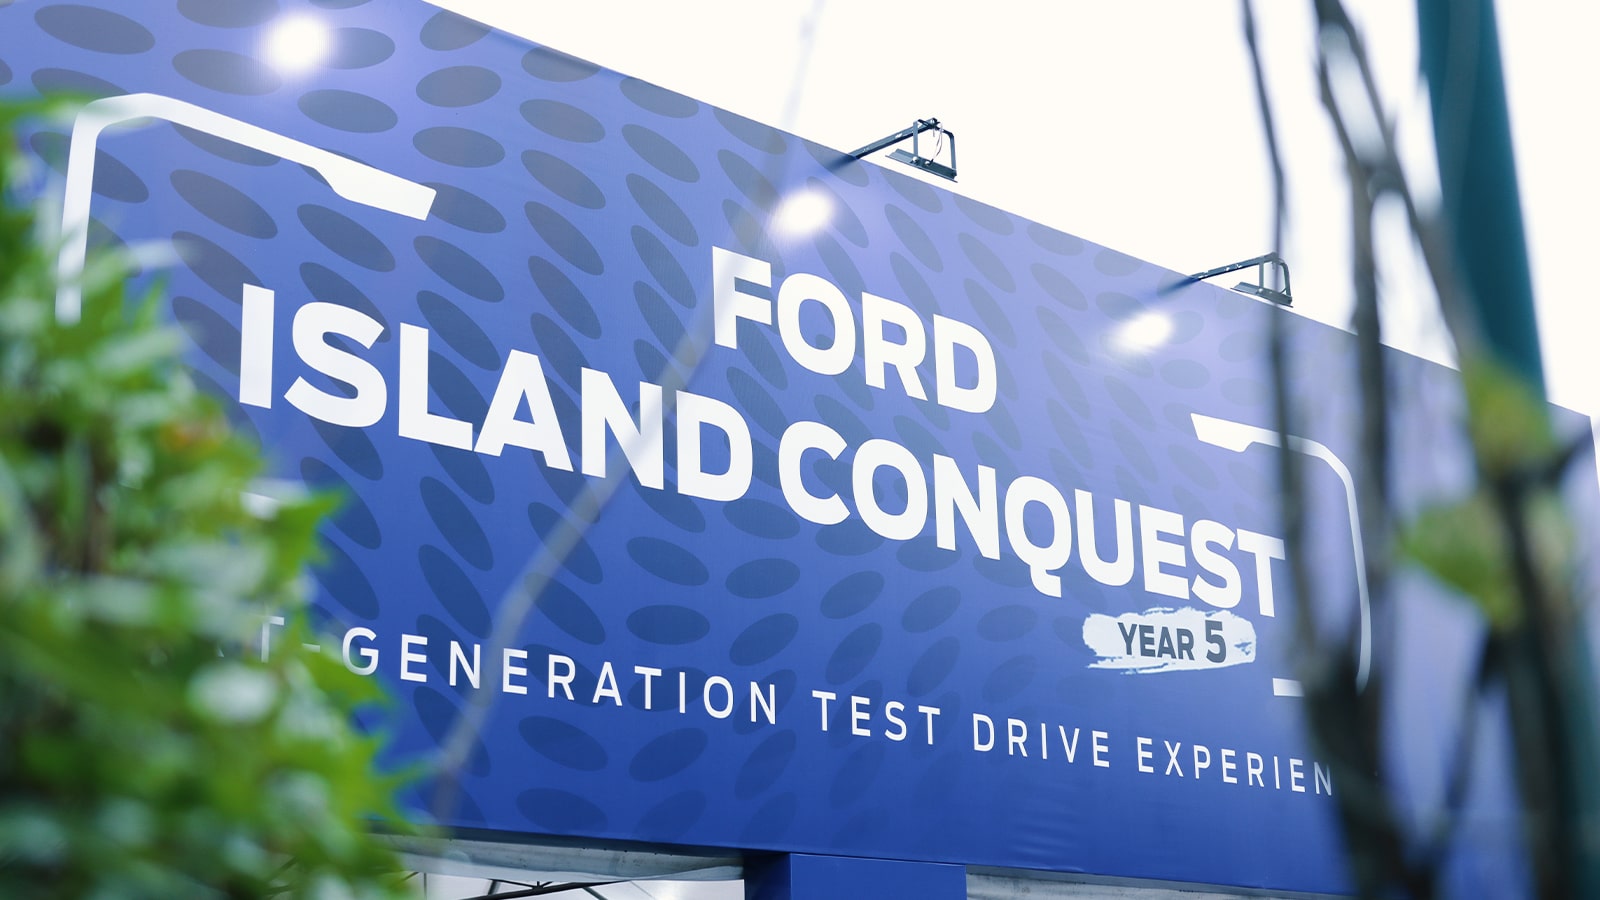 Biggest Ford Island Conquest in BGC from November 18-20, Over PHP 4M in prizes up for grabs